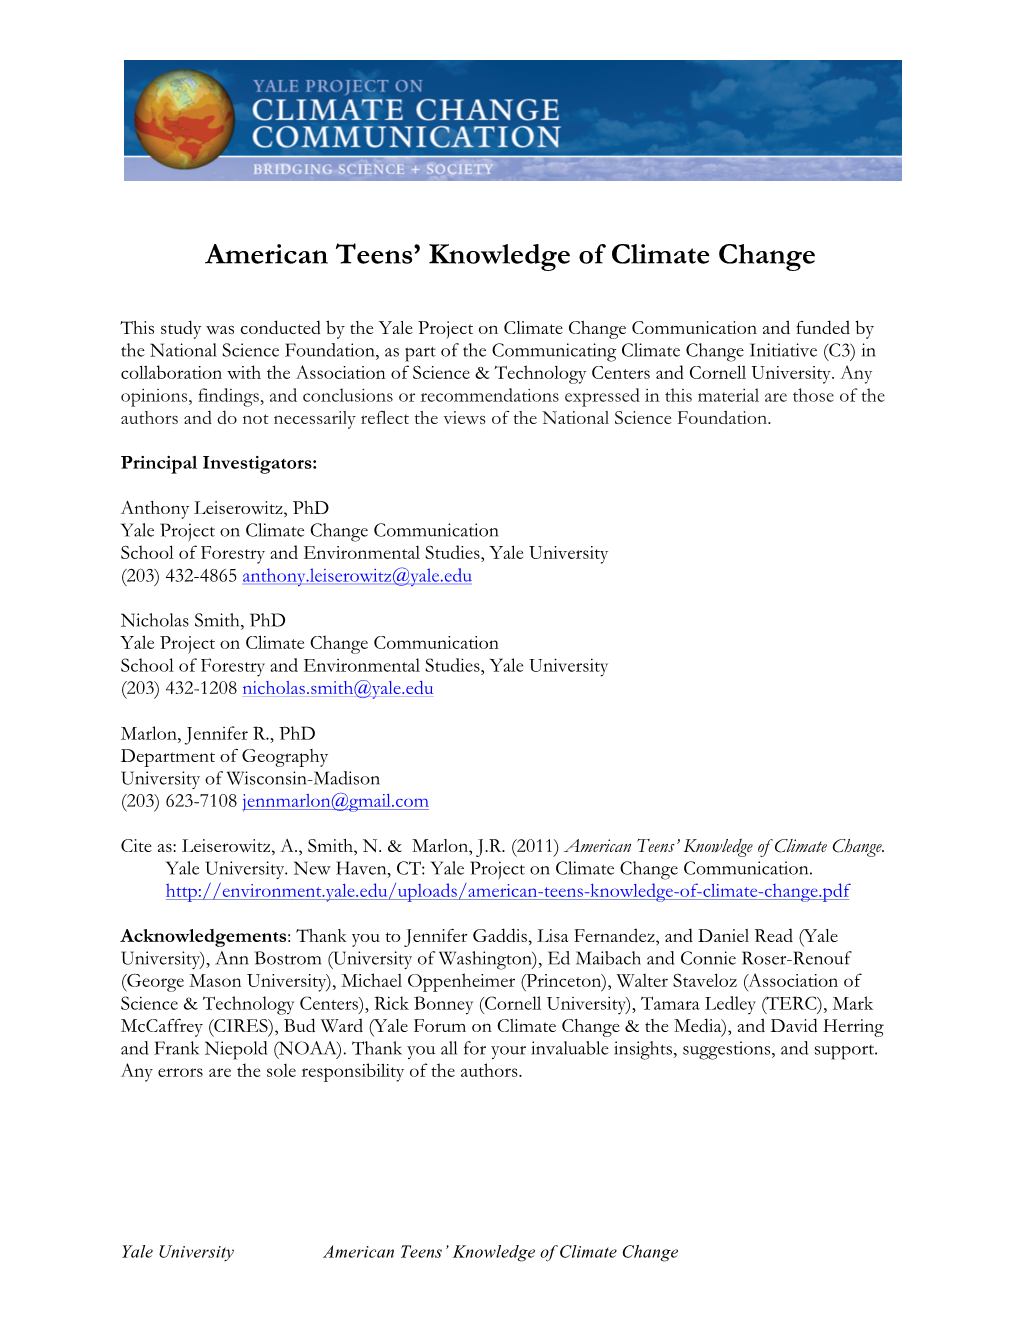 American Teens' Knowledge of Climate Change